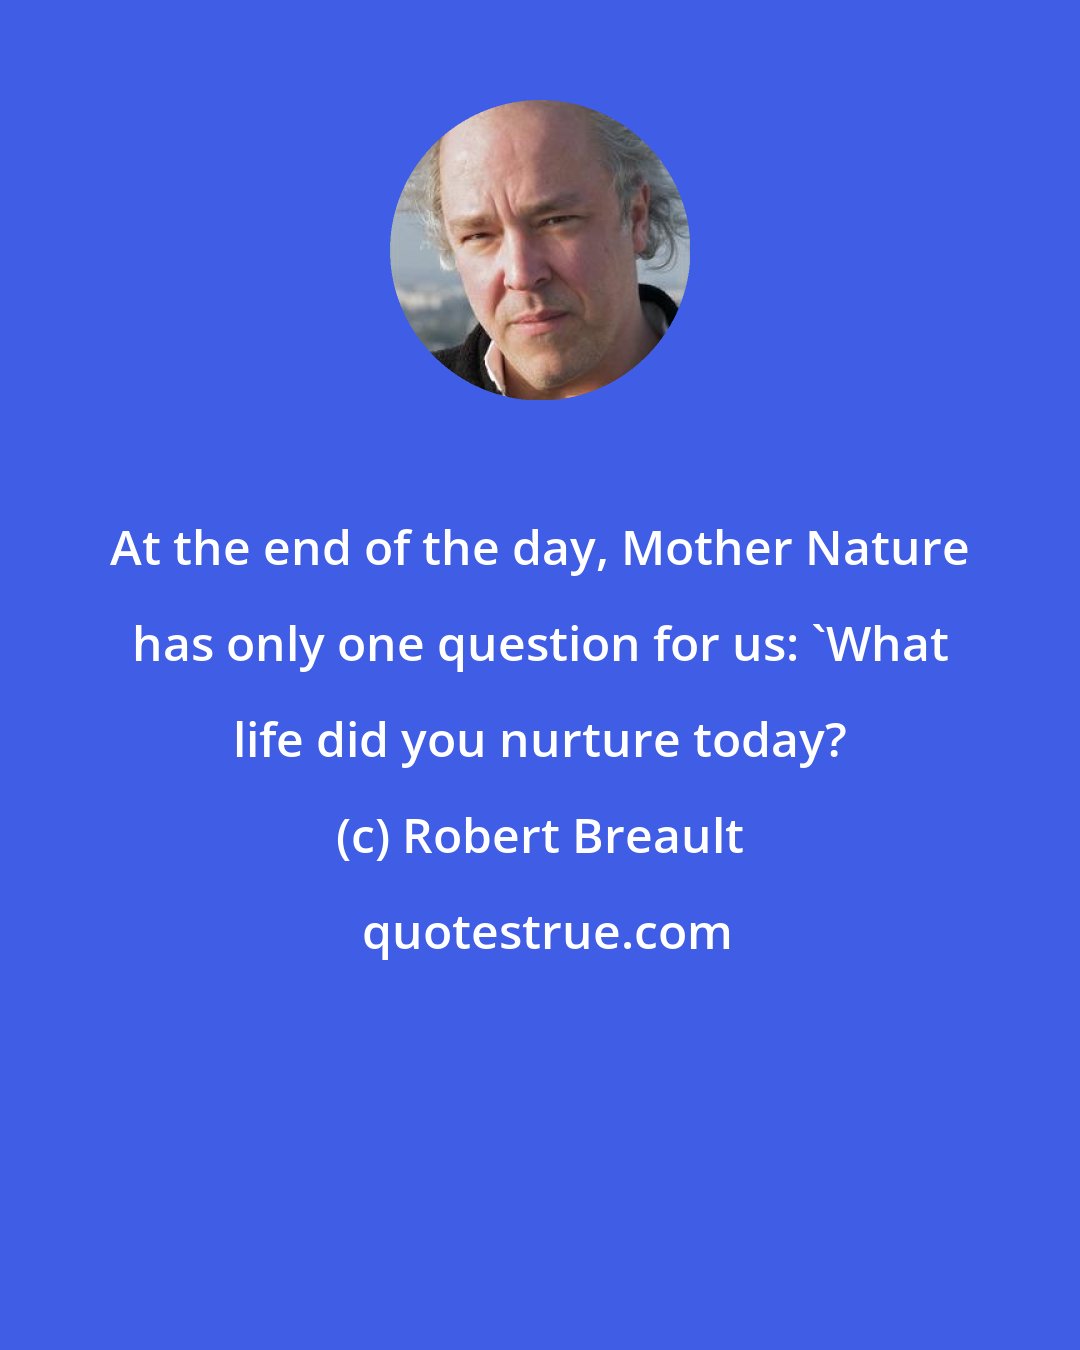 Robert Breault: At the end of the day, Mother Nature has only one question for us: 'What life did you nurture today?